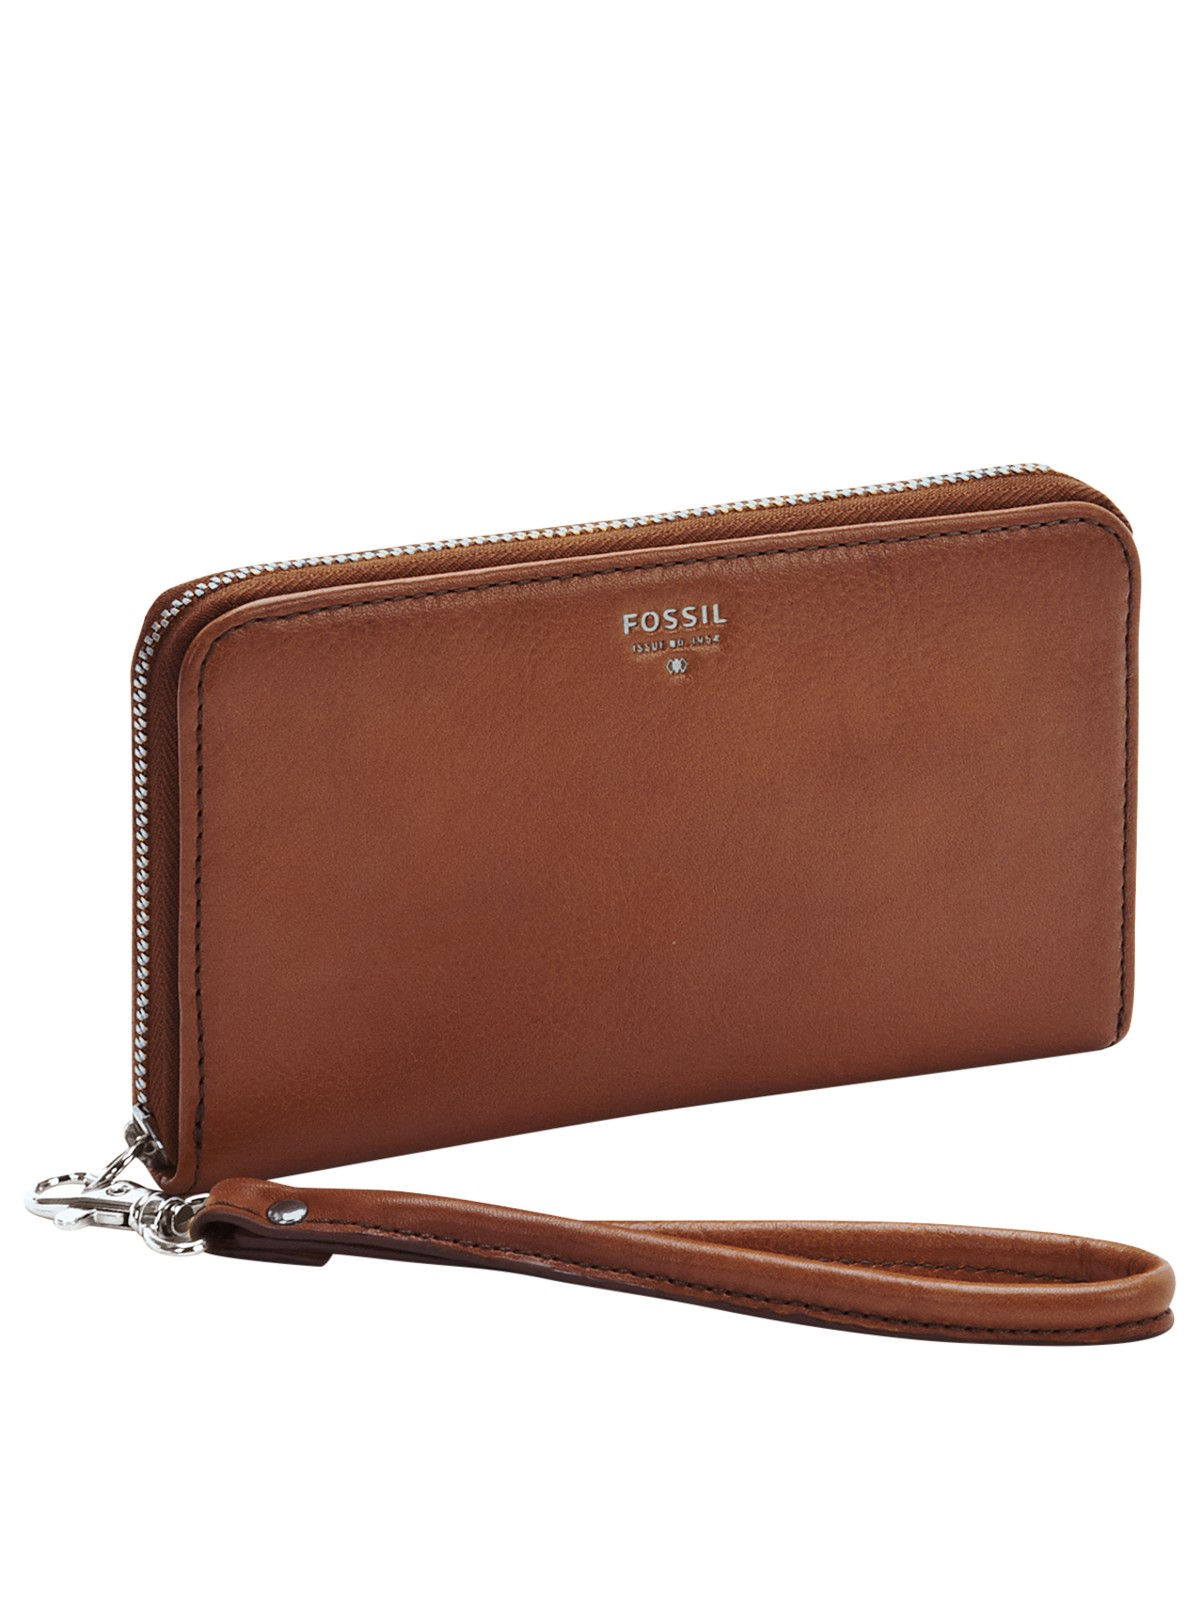 Fossil Fossil Sydney Leather Zip Phone Wallet in Brown for Men | Lyst